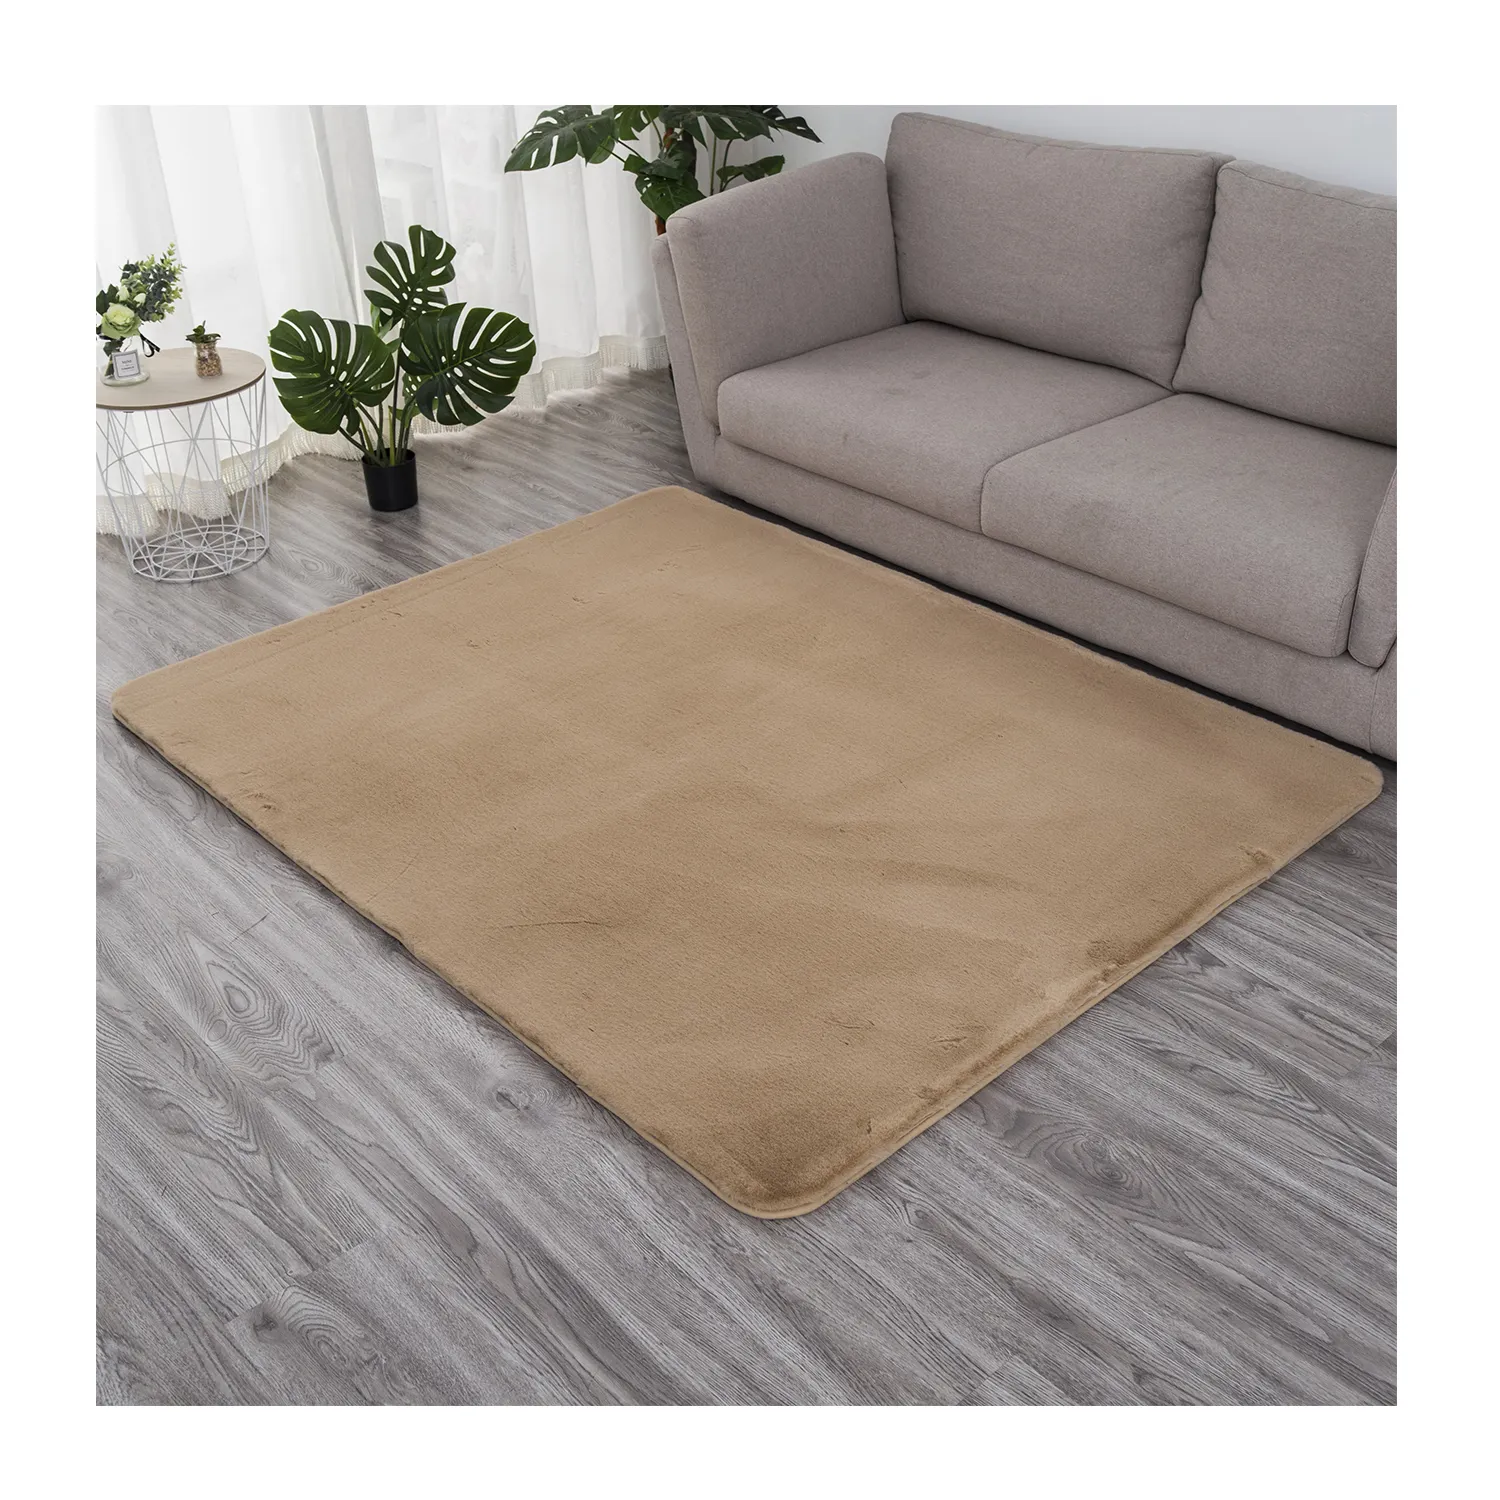 Ultra Soft Faux Fur Area Rugs Faux Rabbit Fur Carpet For Bedroom Dining Room Living Room